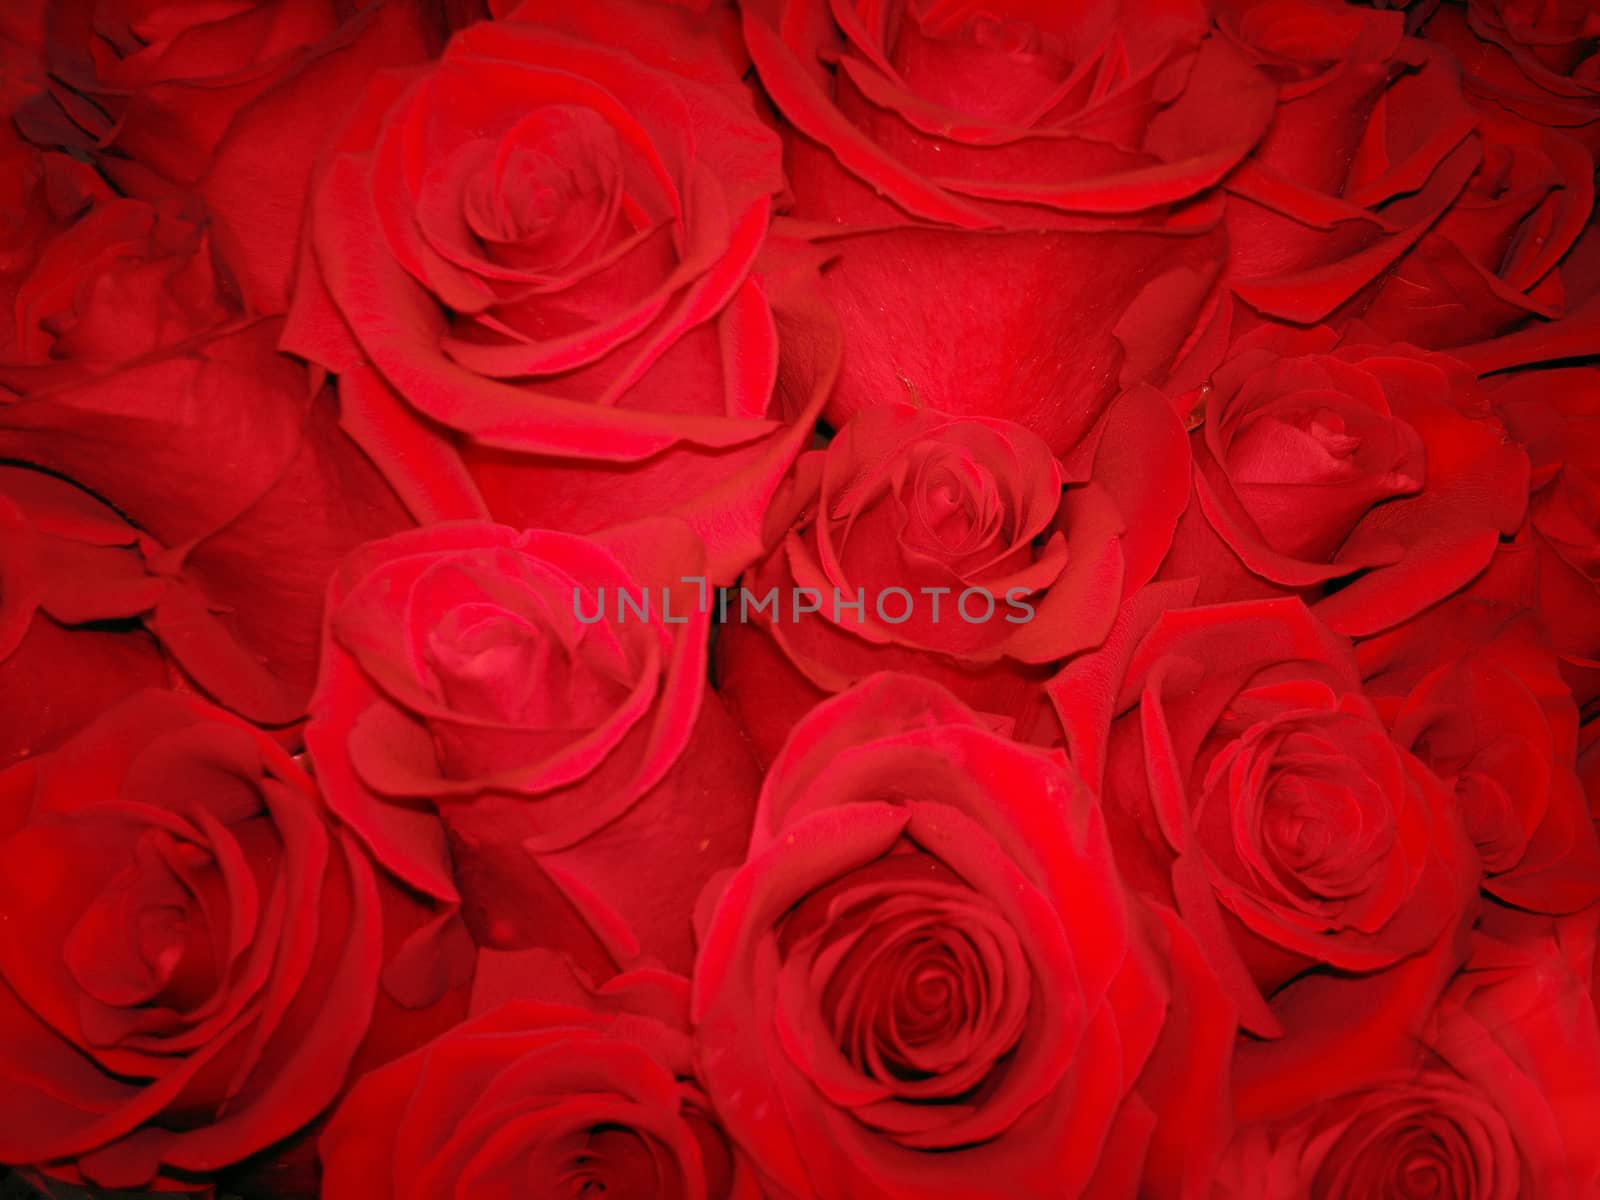 Natural red roses background by elena_vz